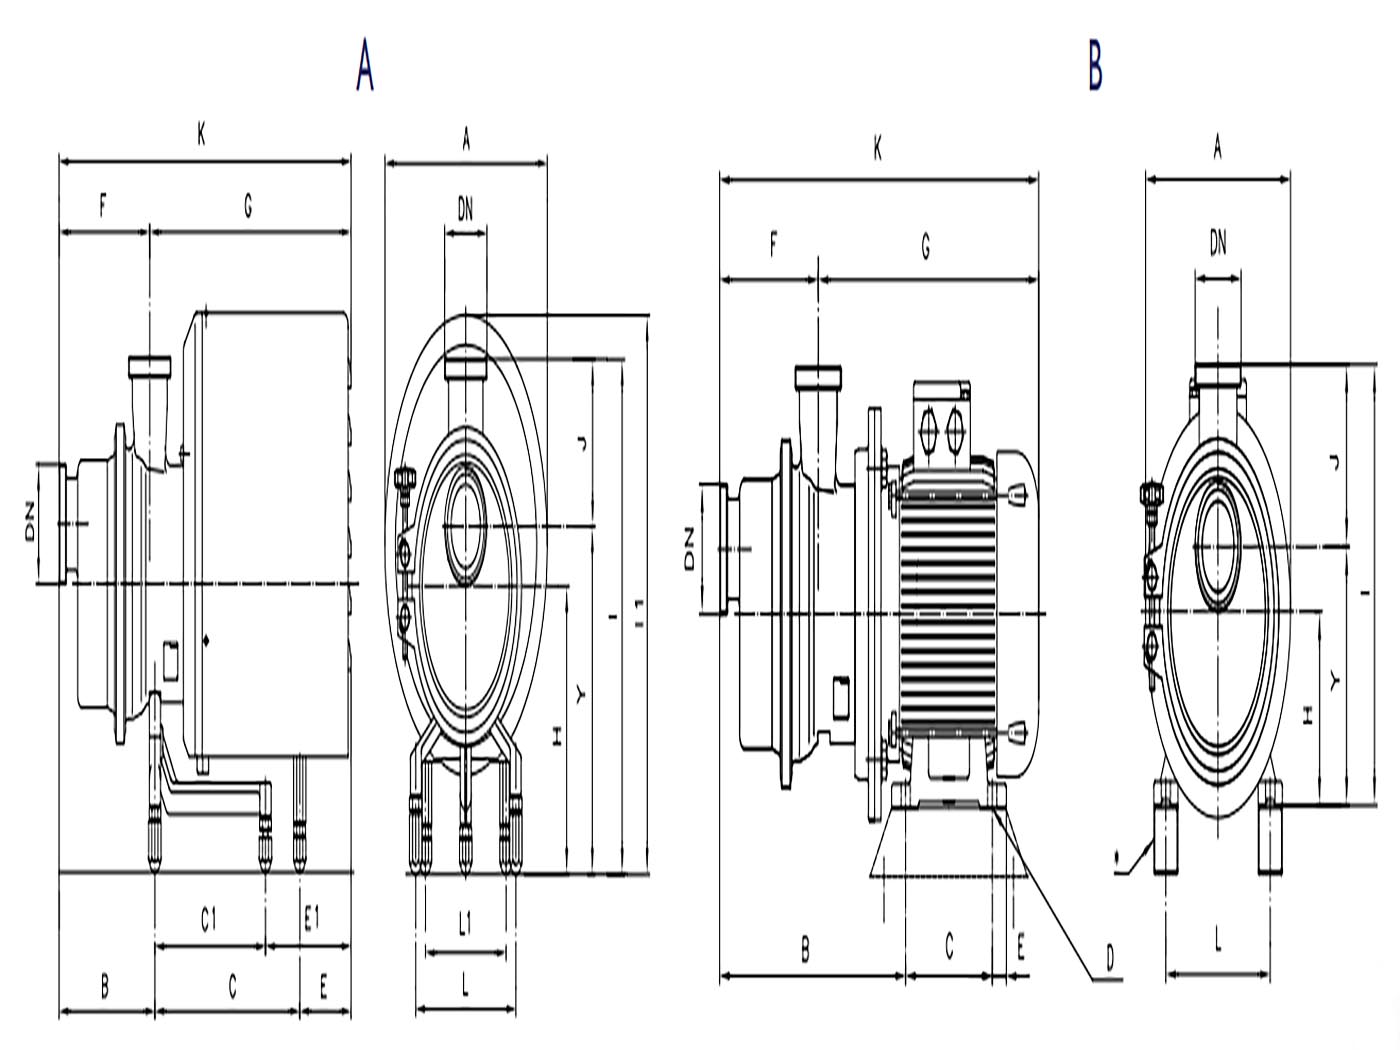 AS Self-priming pumps structure